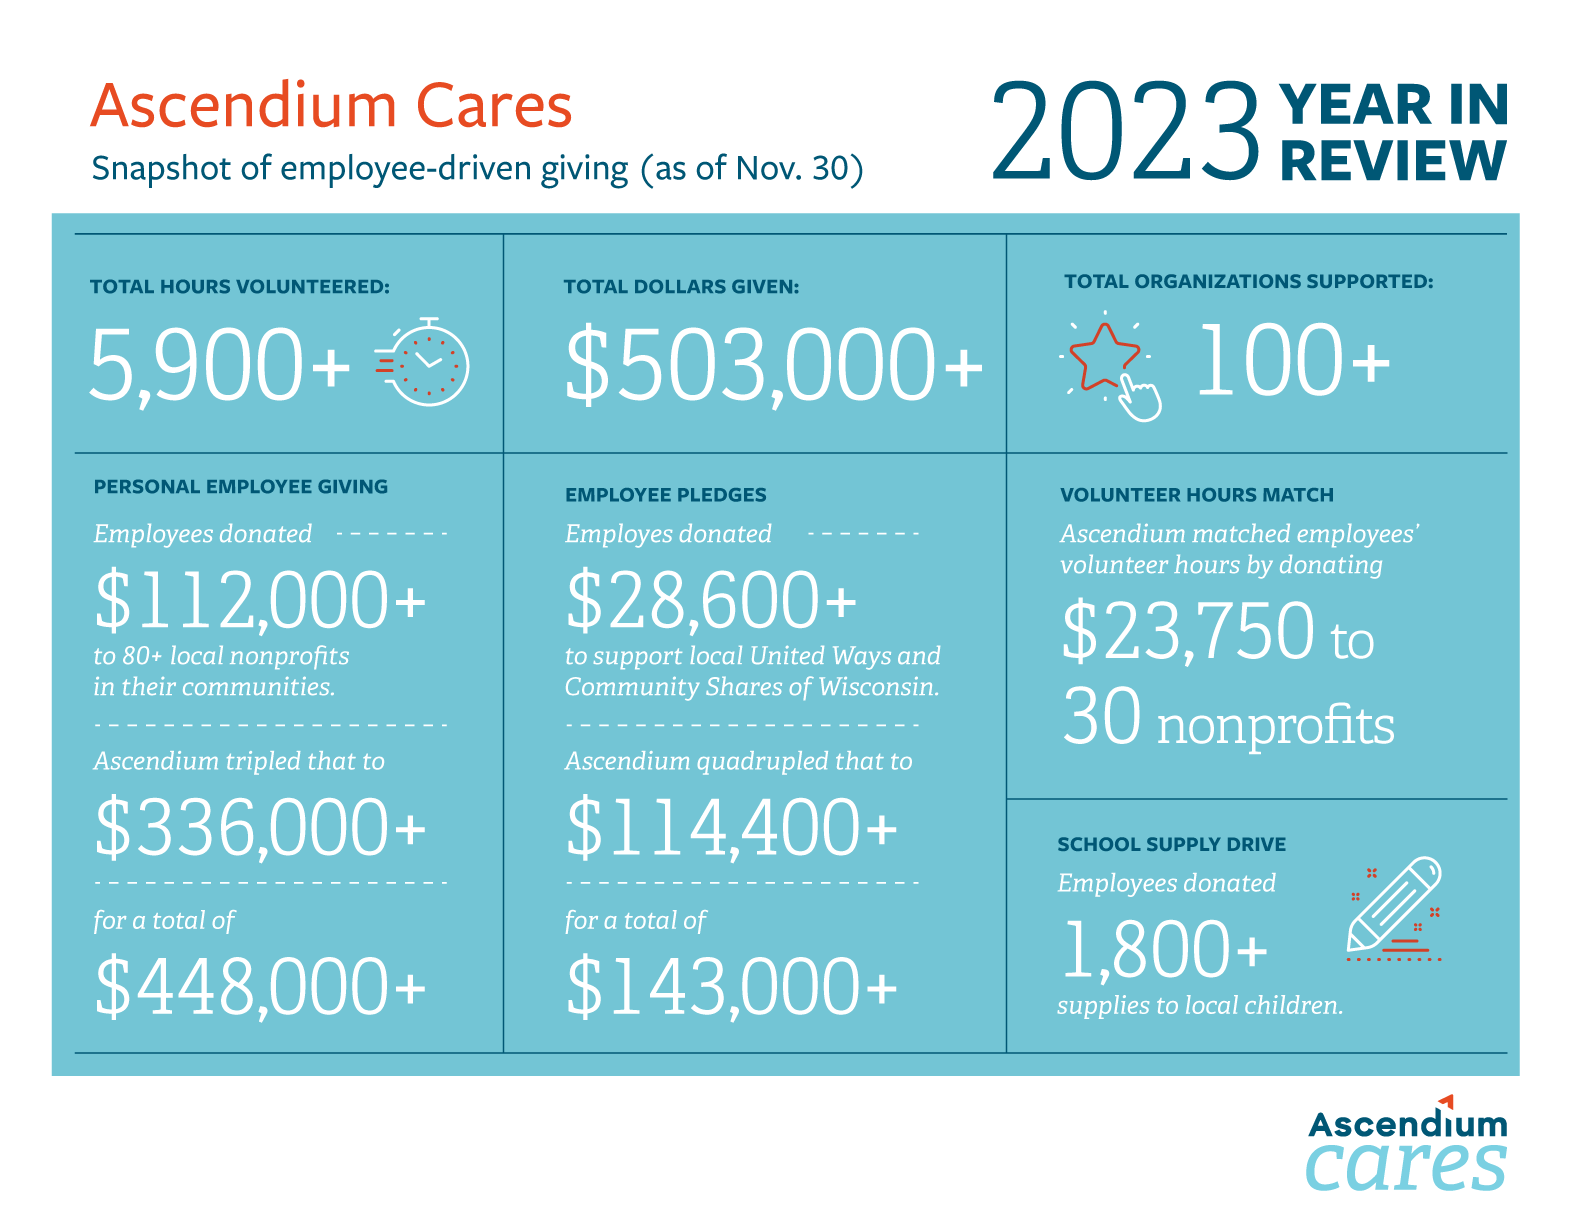 A 2023 year-in-review infographic displaying Ascendium Cares’ snapshot of employee-driven giving (as of Nov. 30), with 5,900+ total hours volunteered, $503,000+ total dollars given, and 100+ total organizations supported. In the personal employee giving category, employees donated $112,000+ to 80+ local nonprofits in their communities, and Ascendium tripled that to $336,000+ for a total of $448,000+. In the employee pledges category, employees donated $28,600+ to support local United Ways and Community Shares of Wisconsin, and Ascendium quadrupled that to $114,400+ for a total of $143,000+. In the volunteer hours match category, Ascendium matched employees’ volunteer hours by donating $23,750 to 30 nonprofits. In our school supply drive, employees donated 1,800+ supplies to local children.